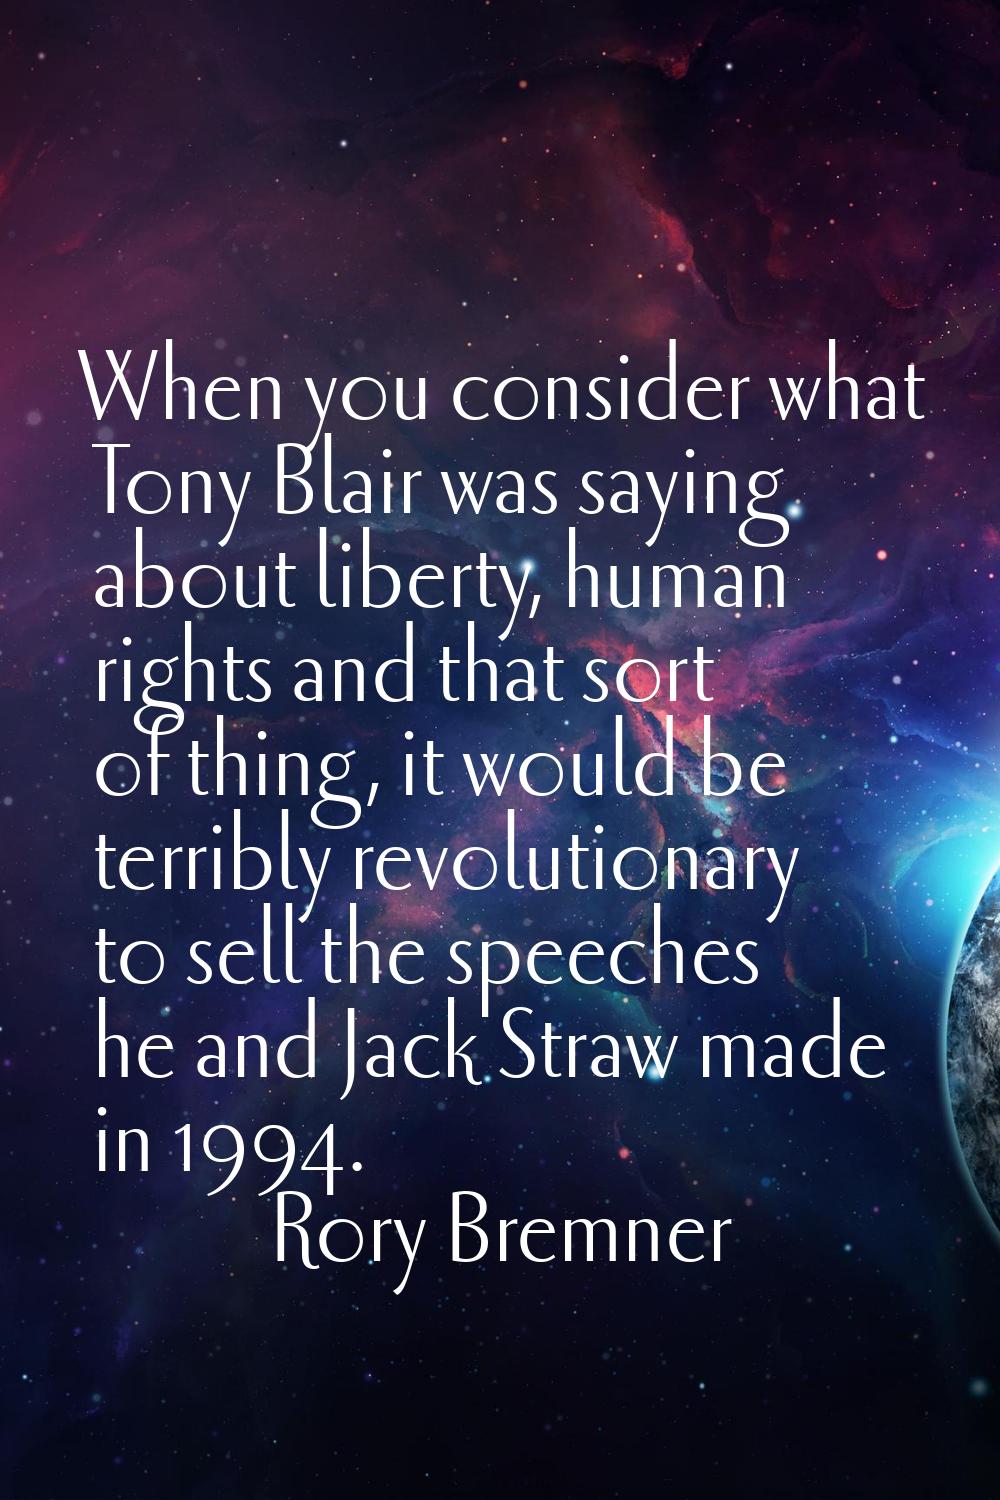 When you consider what Tony Blair was saying about liberty, human rights and that sort of thing, it